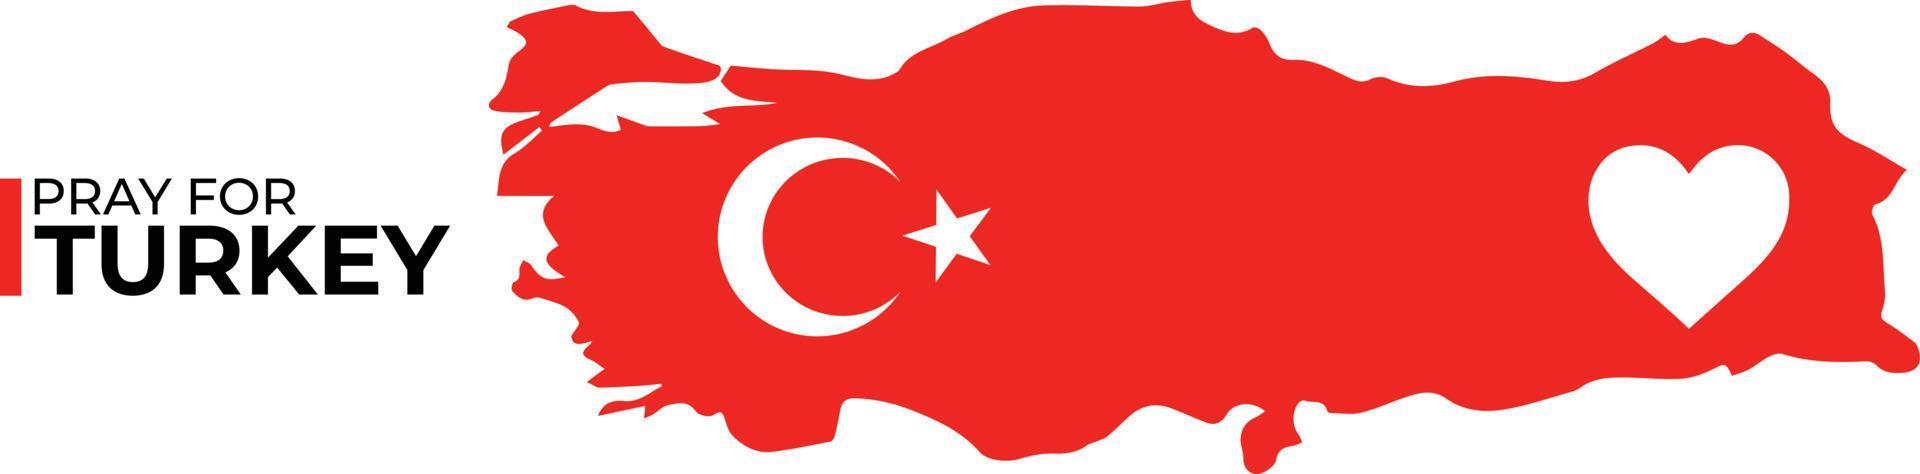 Pray for the People of  Turkey Earthquake Victims. vector